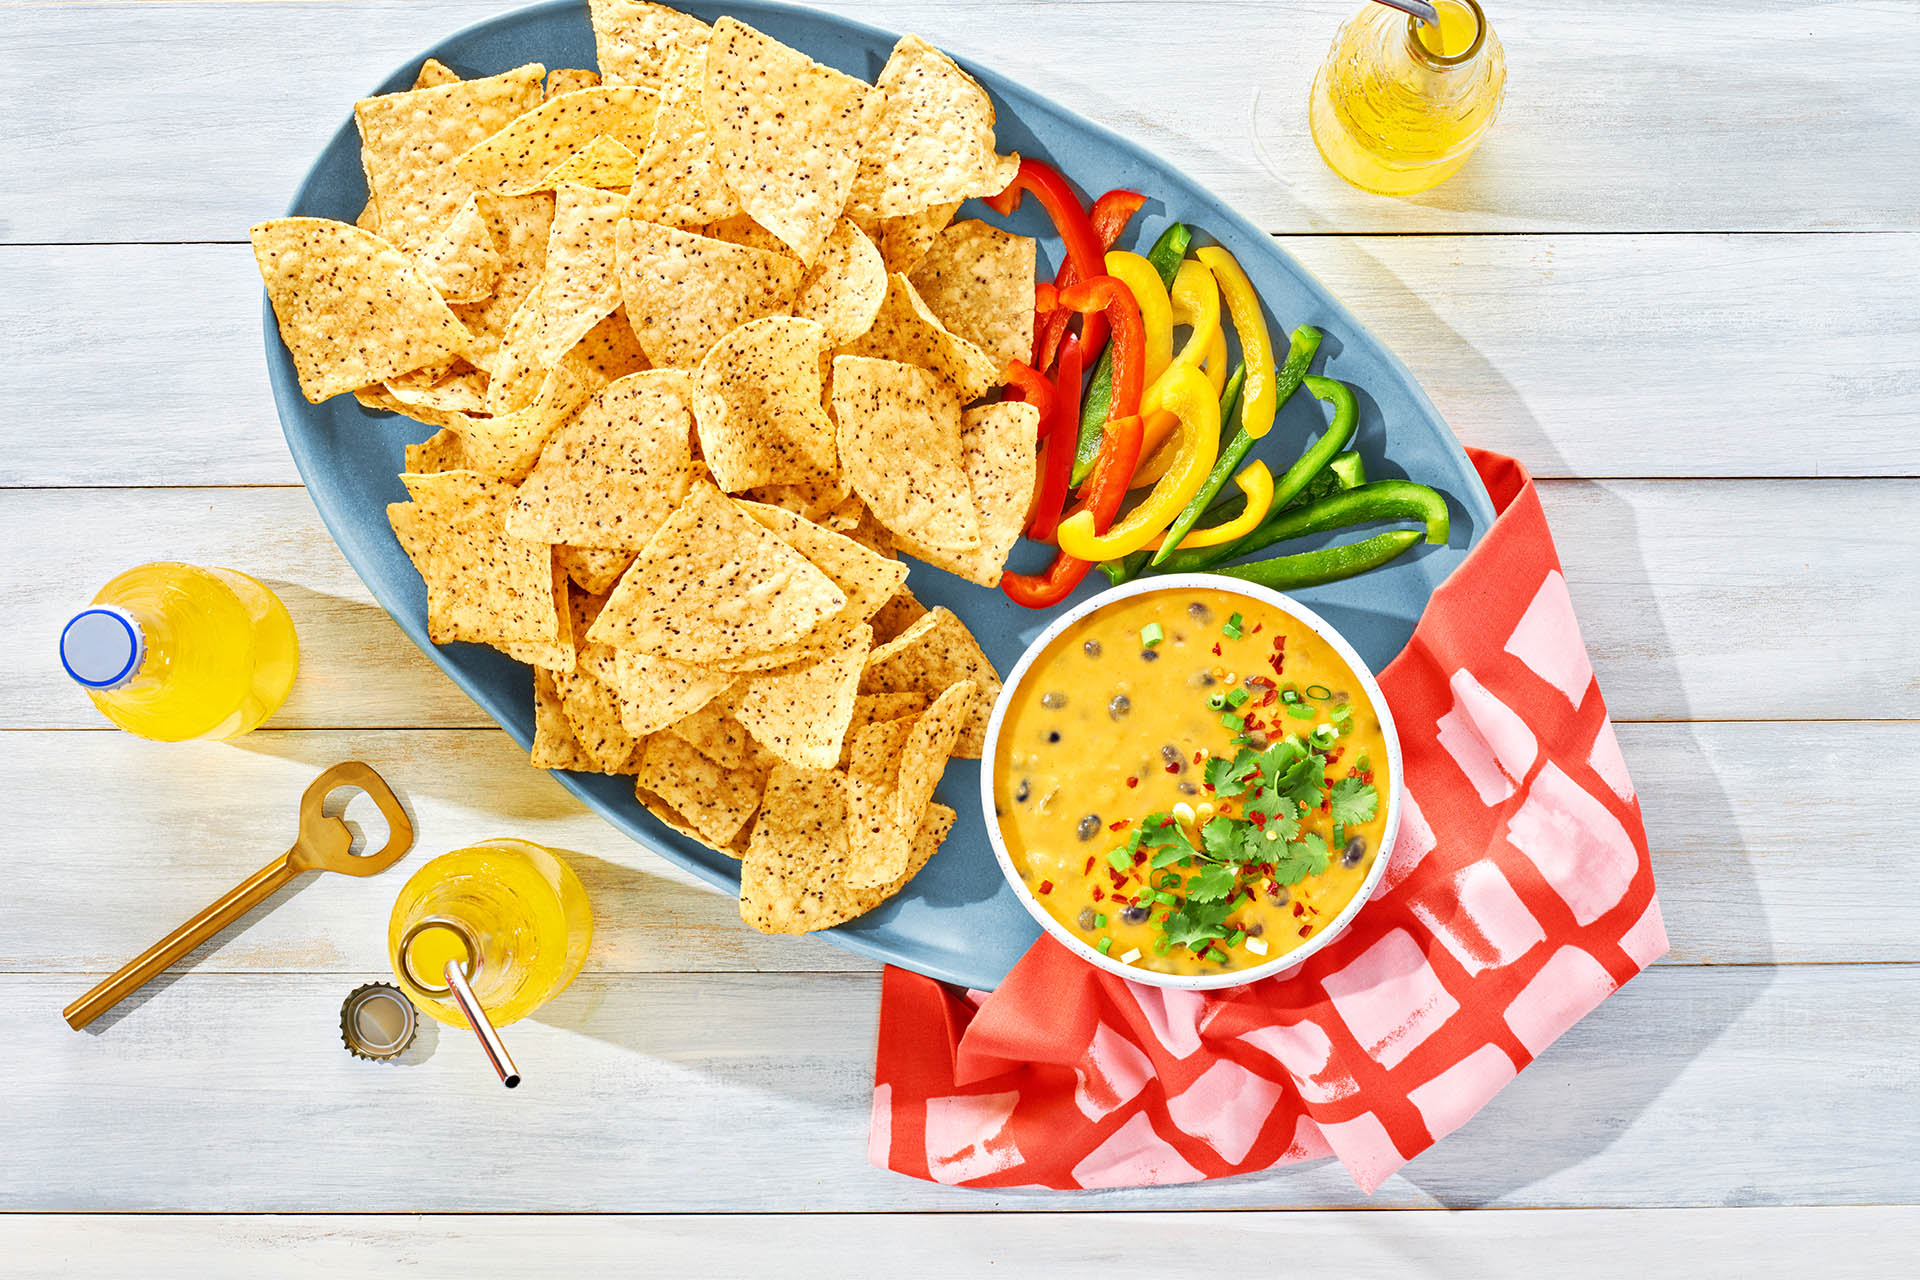 Dish of Black Bean Con Queso Dip with corn chips and pepper slices.